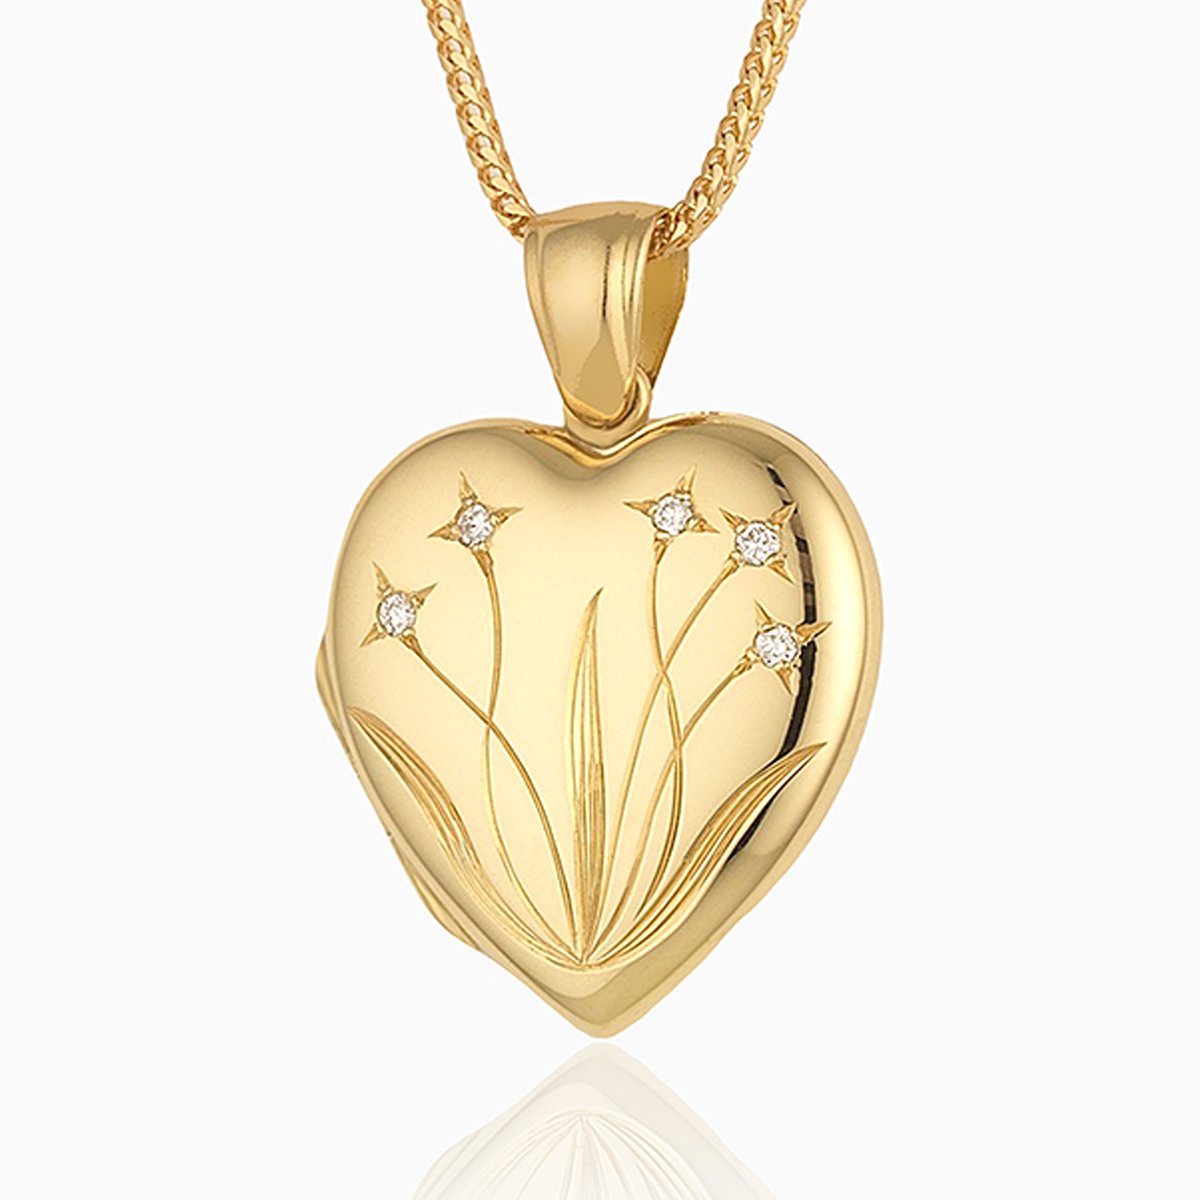 18 ct gold heart locket set with diamonds and engraved with a floral design, on an 18 ct gold franco chain